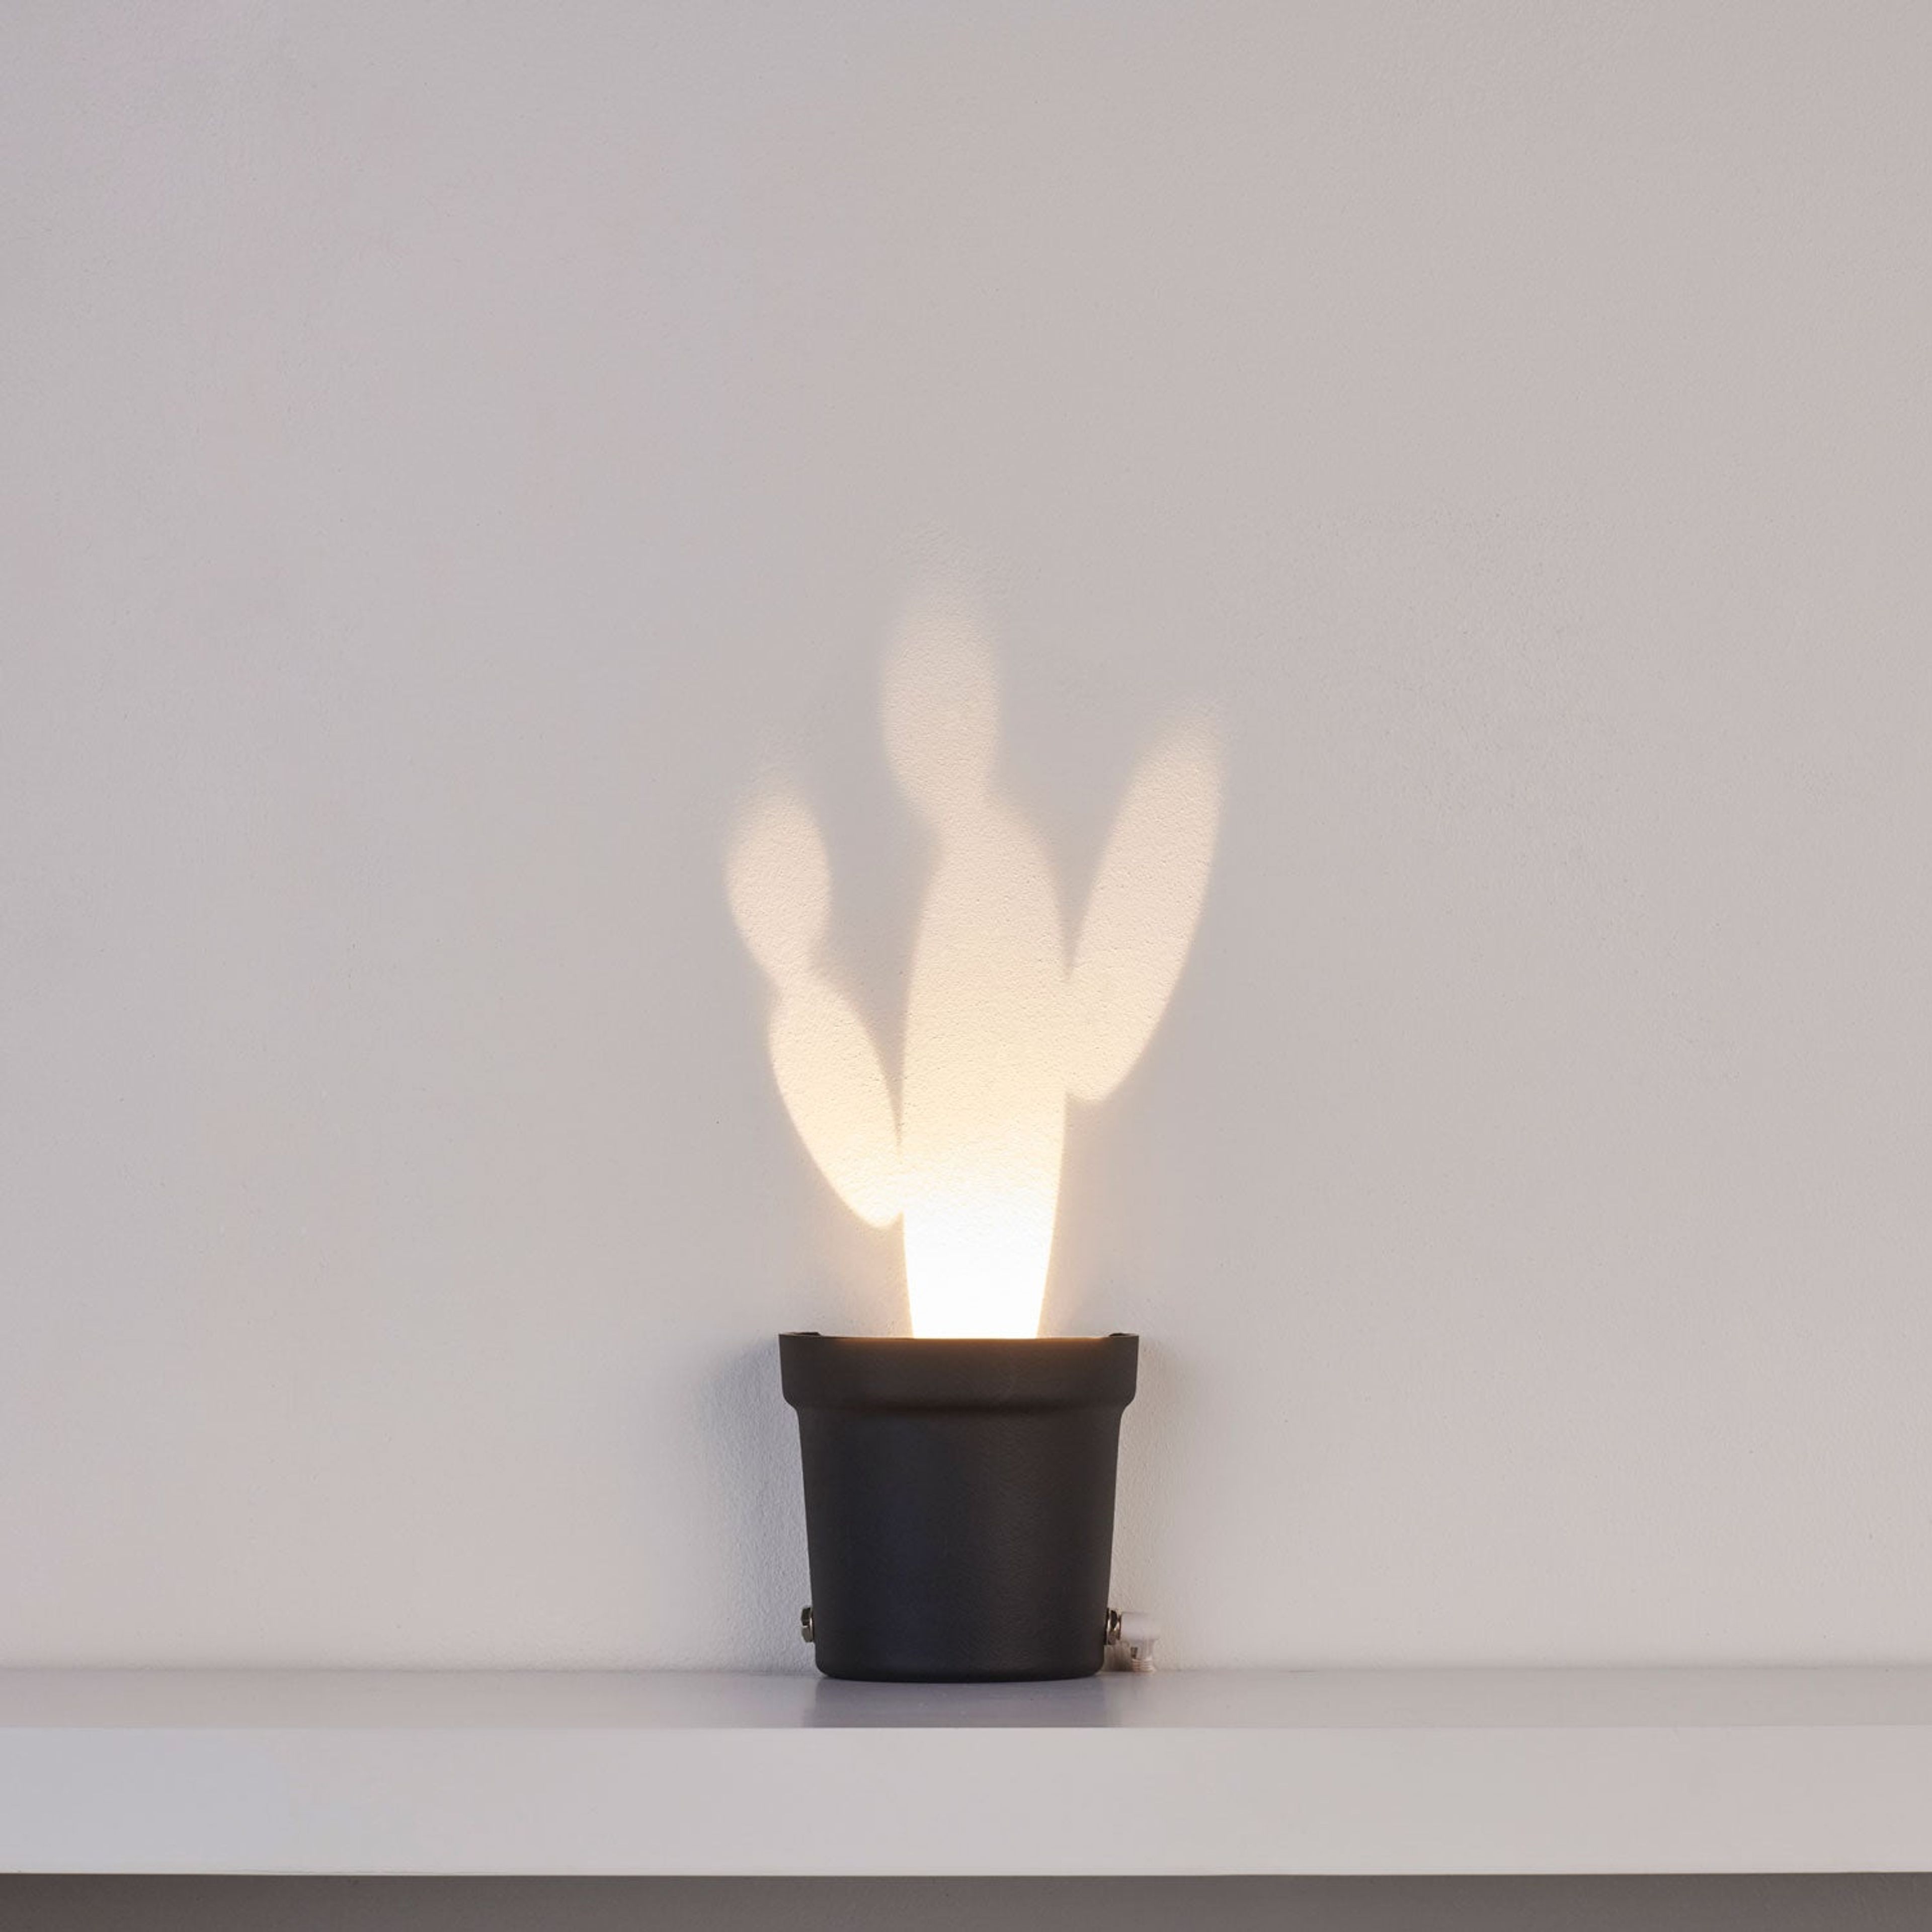 A Single Lamp Made Plastic Containing 3 Different Cactus Shapes